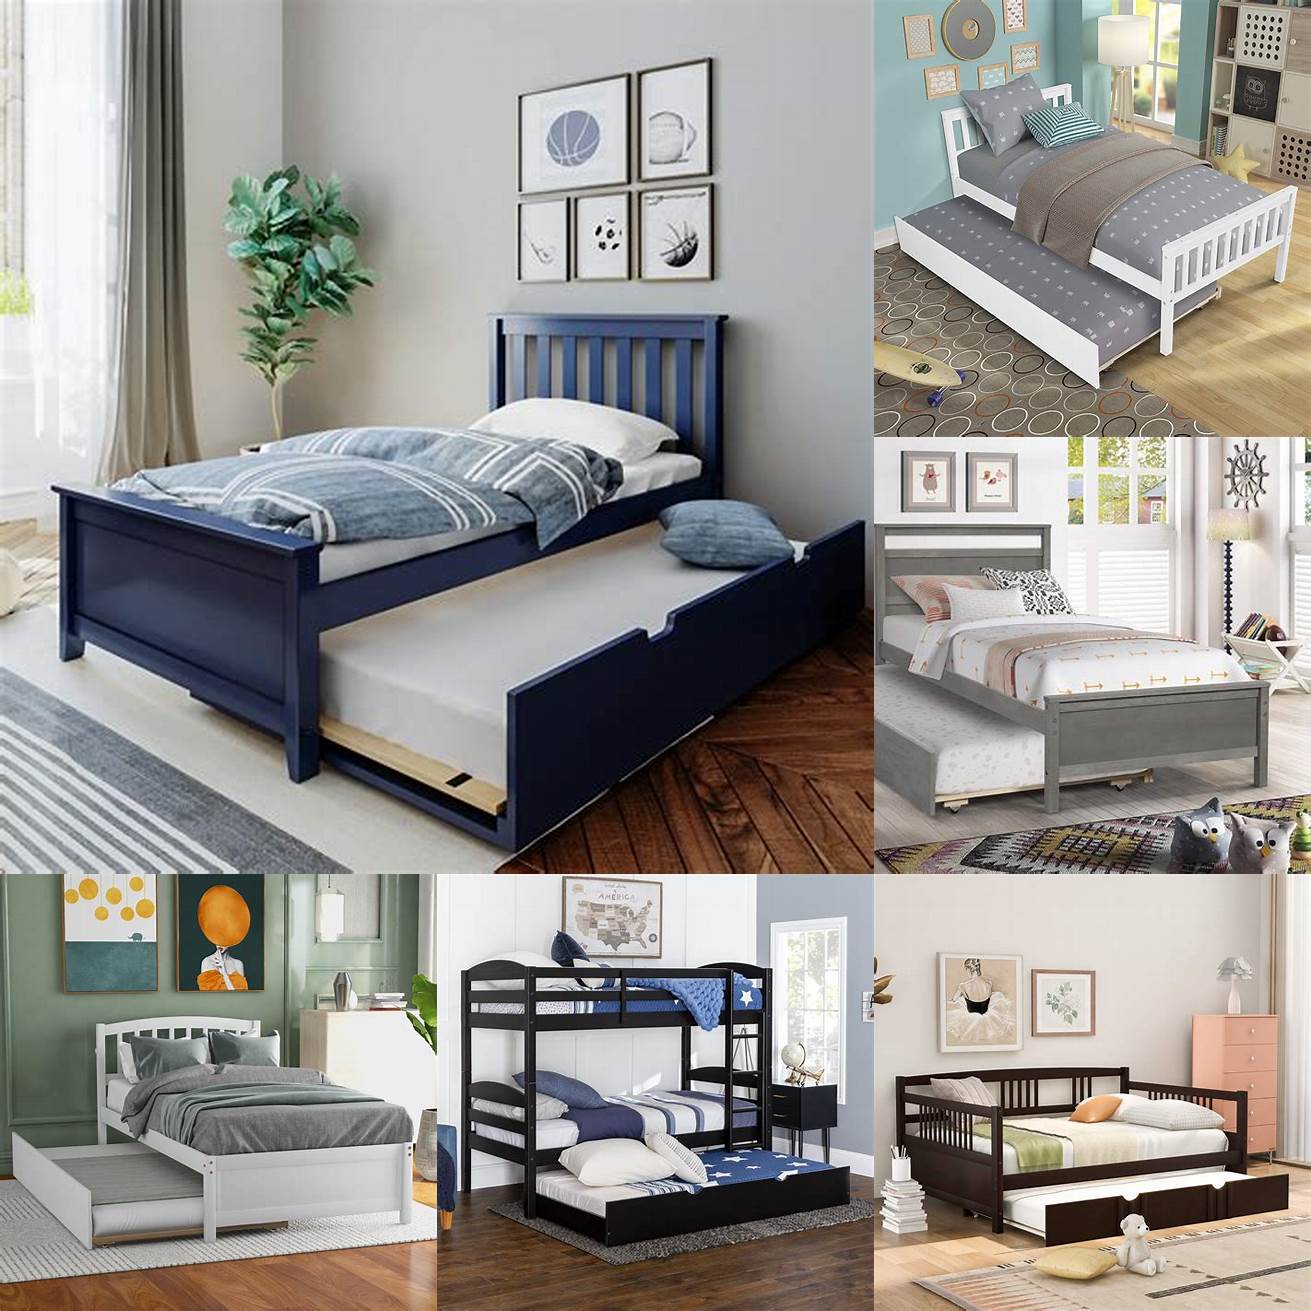 A Wood Twin Bed Frame with a trundle bed